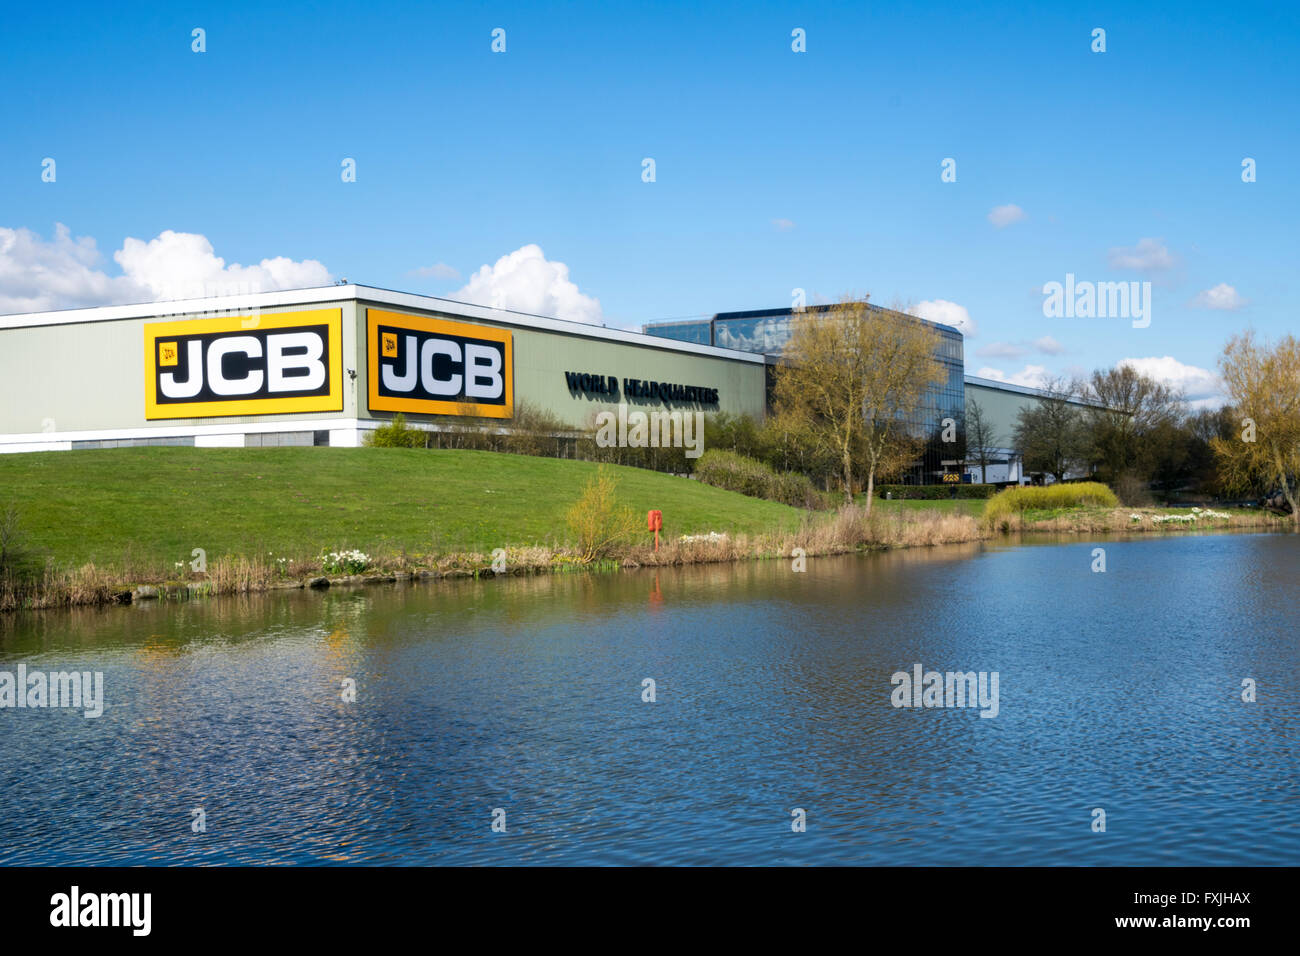 JCB World Headquarters at Rocester, Uttoxeter, Staffordshire with ...